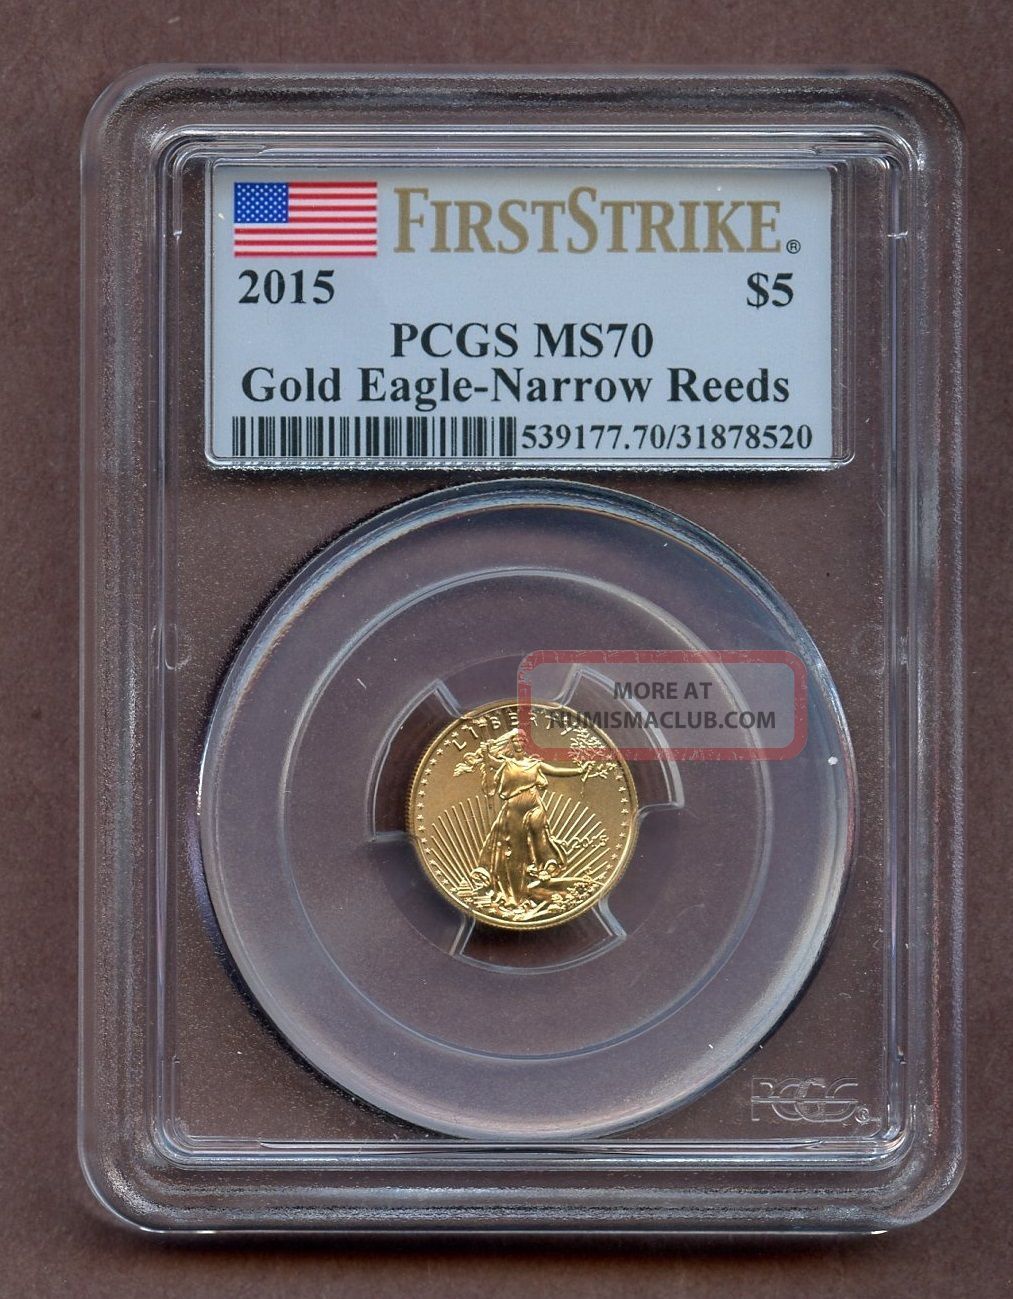 2015 Pcgs Ms70 Gold Eagle - Narrow Reeds $5 Gold Coin First Strike Gold photo